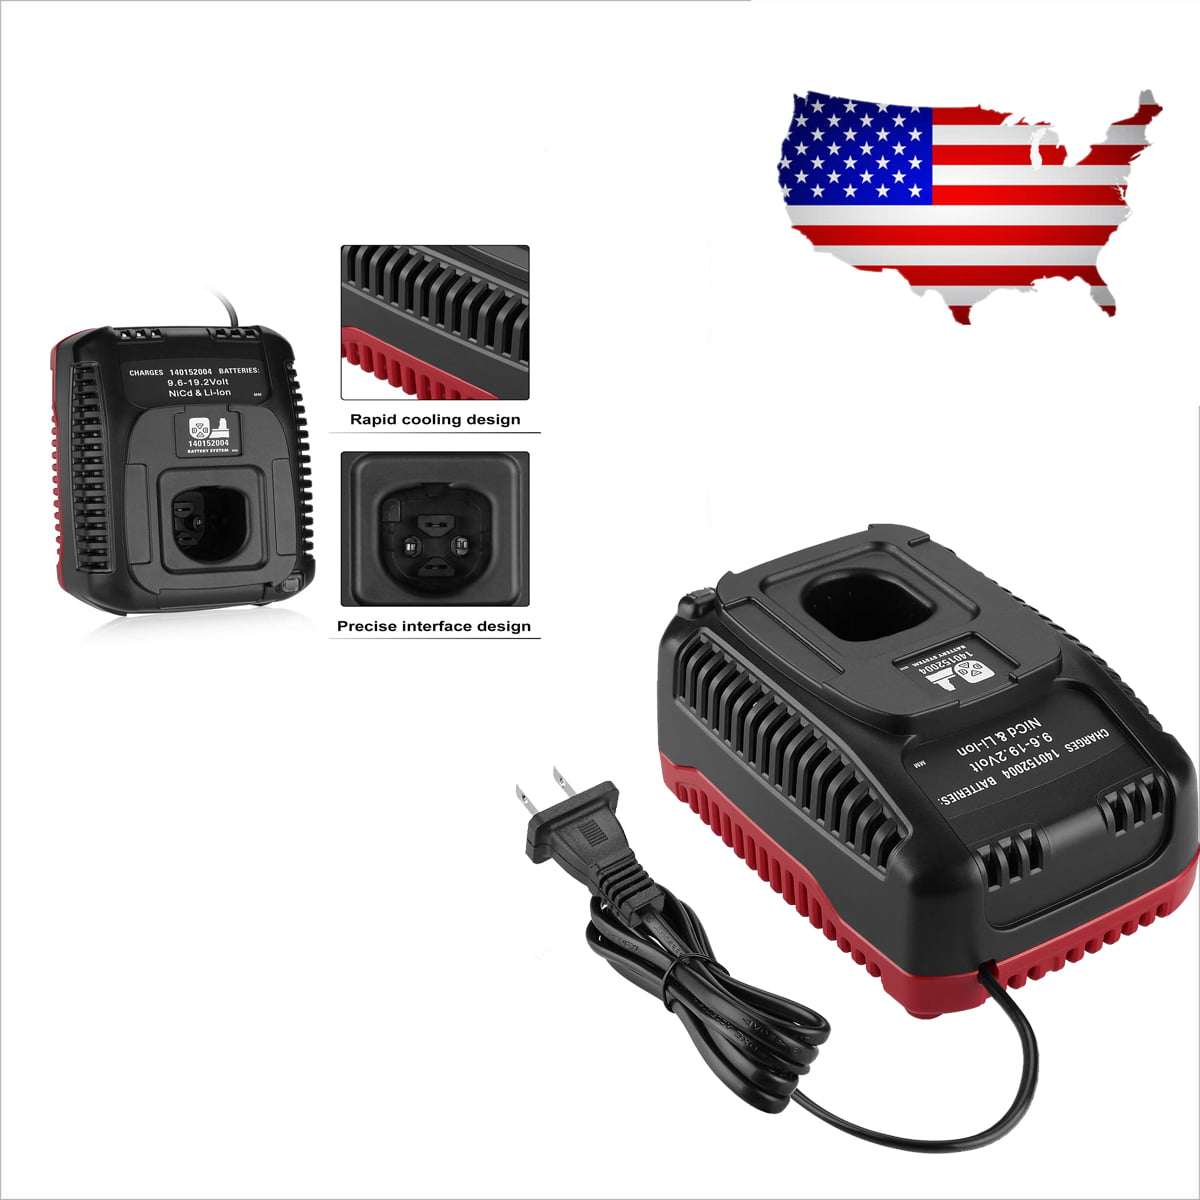 Replacement Battery Charger For Craftsman C3 19.2 Volt Ni-Cd & Li-Ion Battery FH